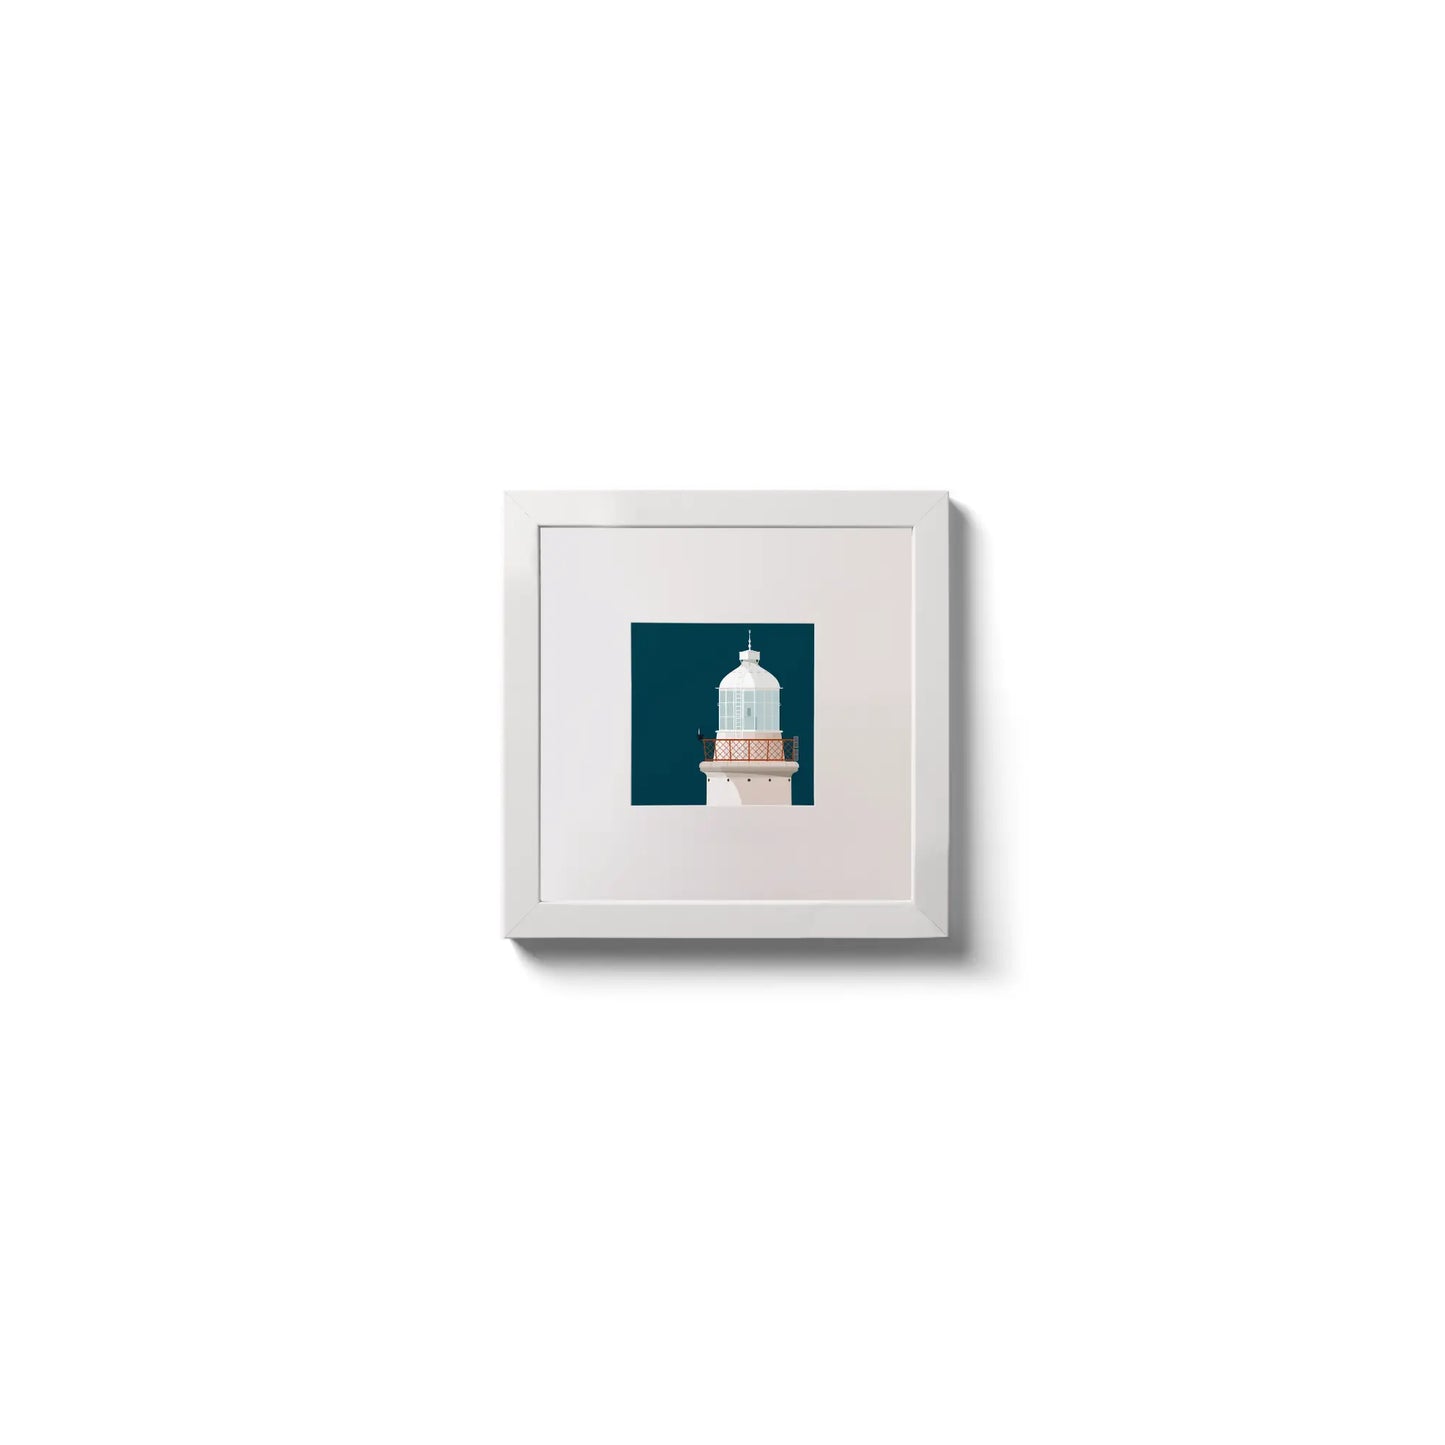 Illustration of Haulbowline lighthouse on a midnight blue background,  in a white square frame measuring 10x10cm.